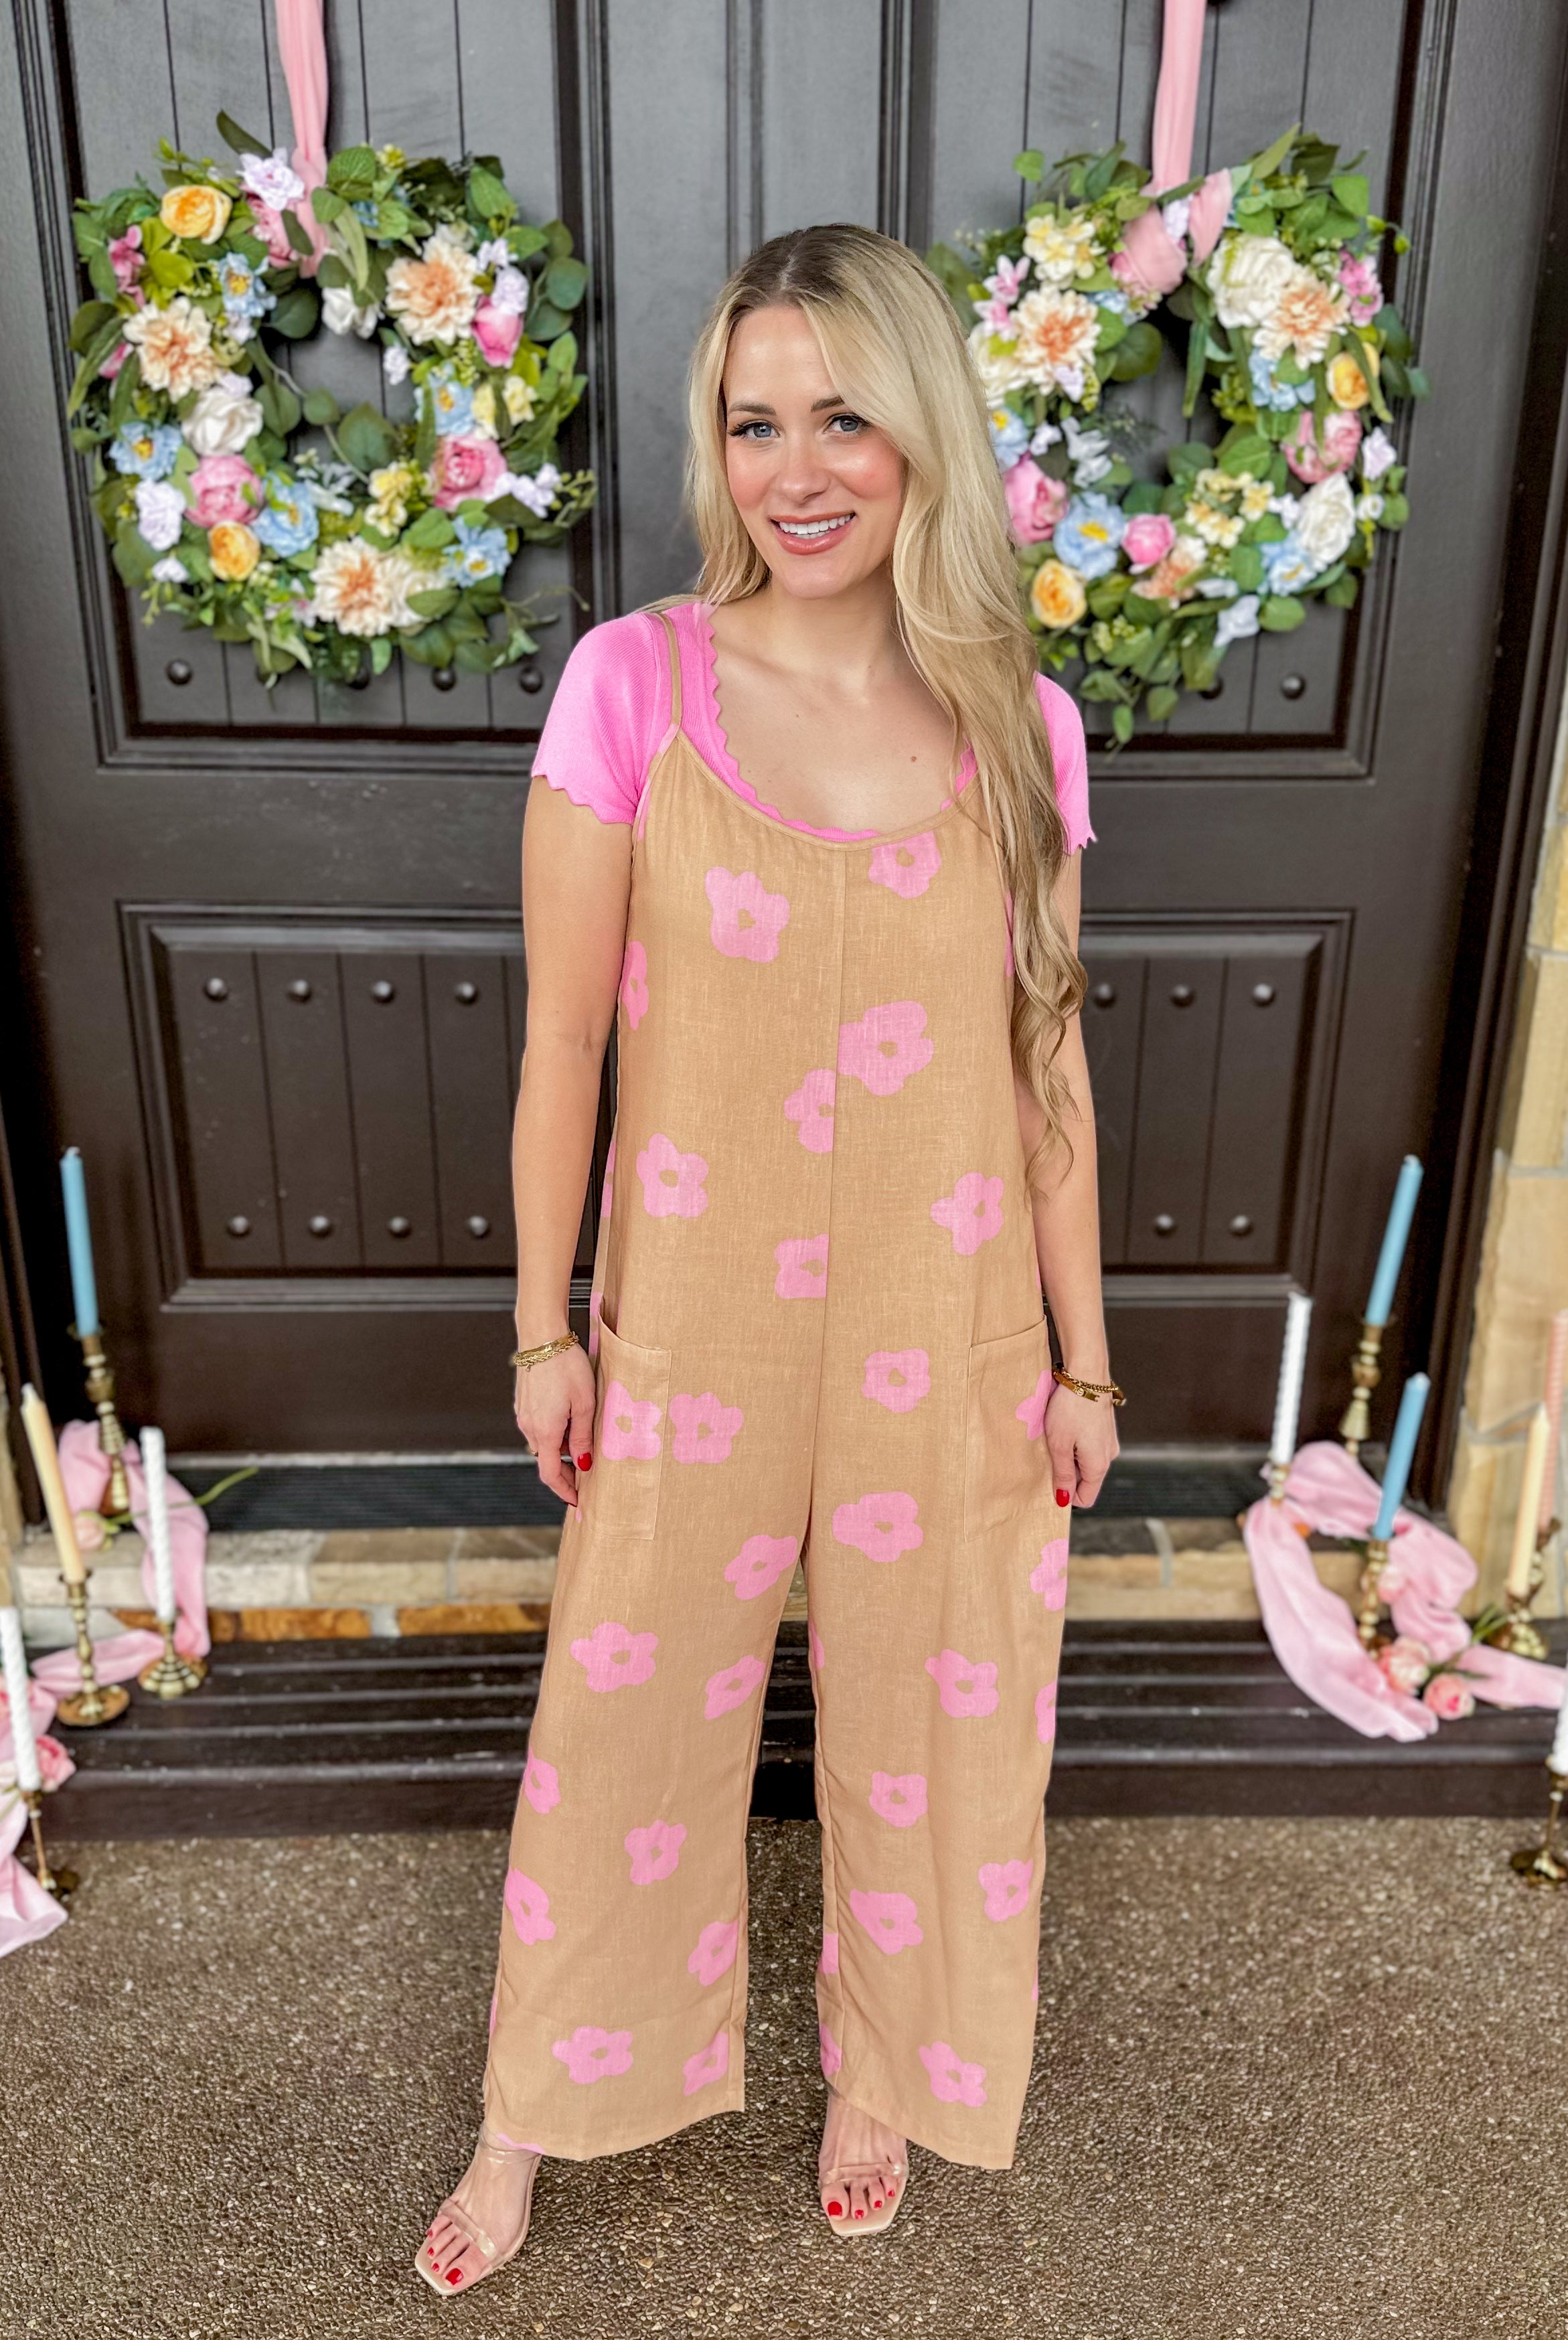 Shana Floral Print Jumpsuit With Pockets - Be You Boutique